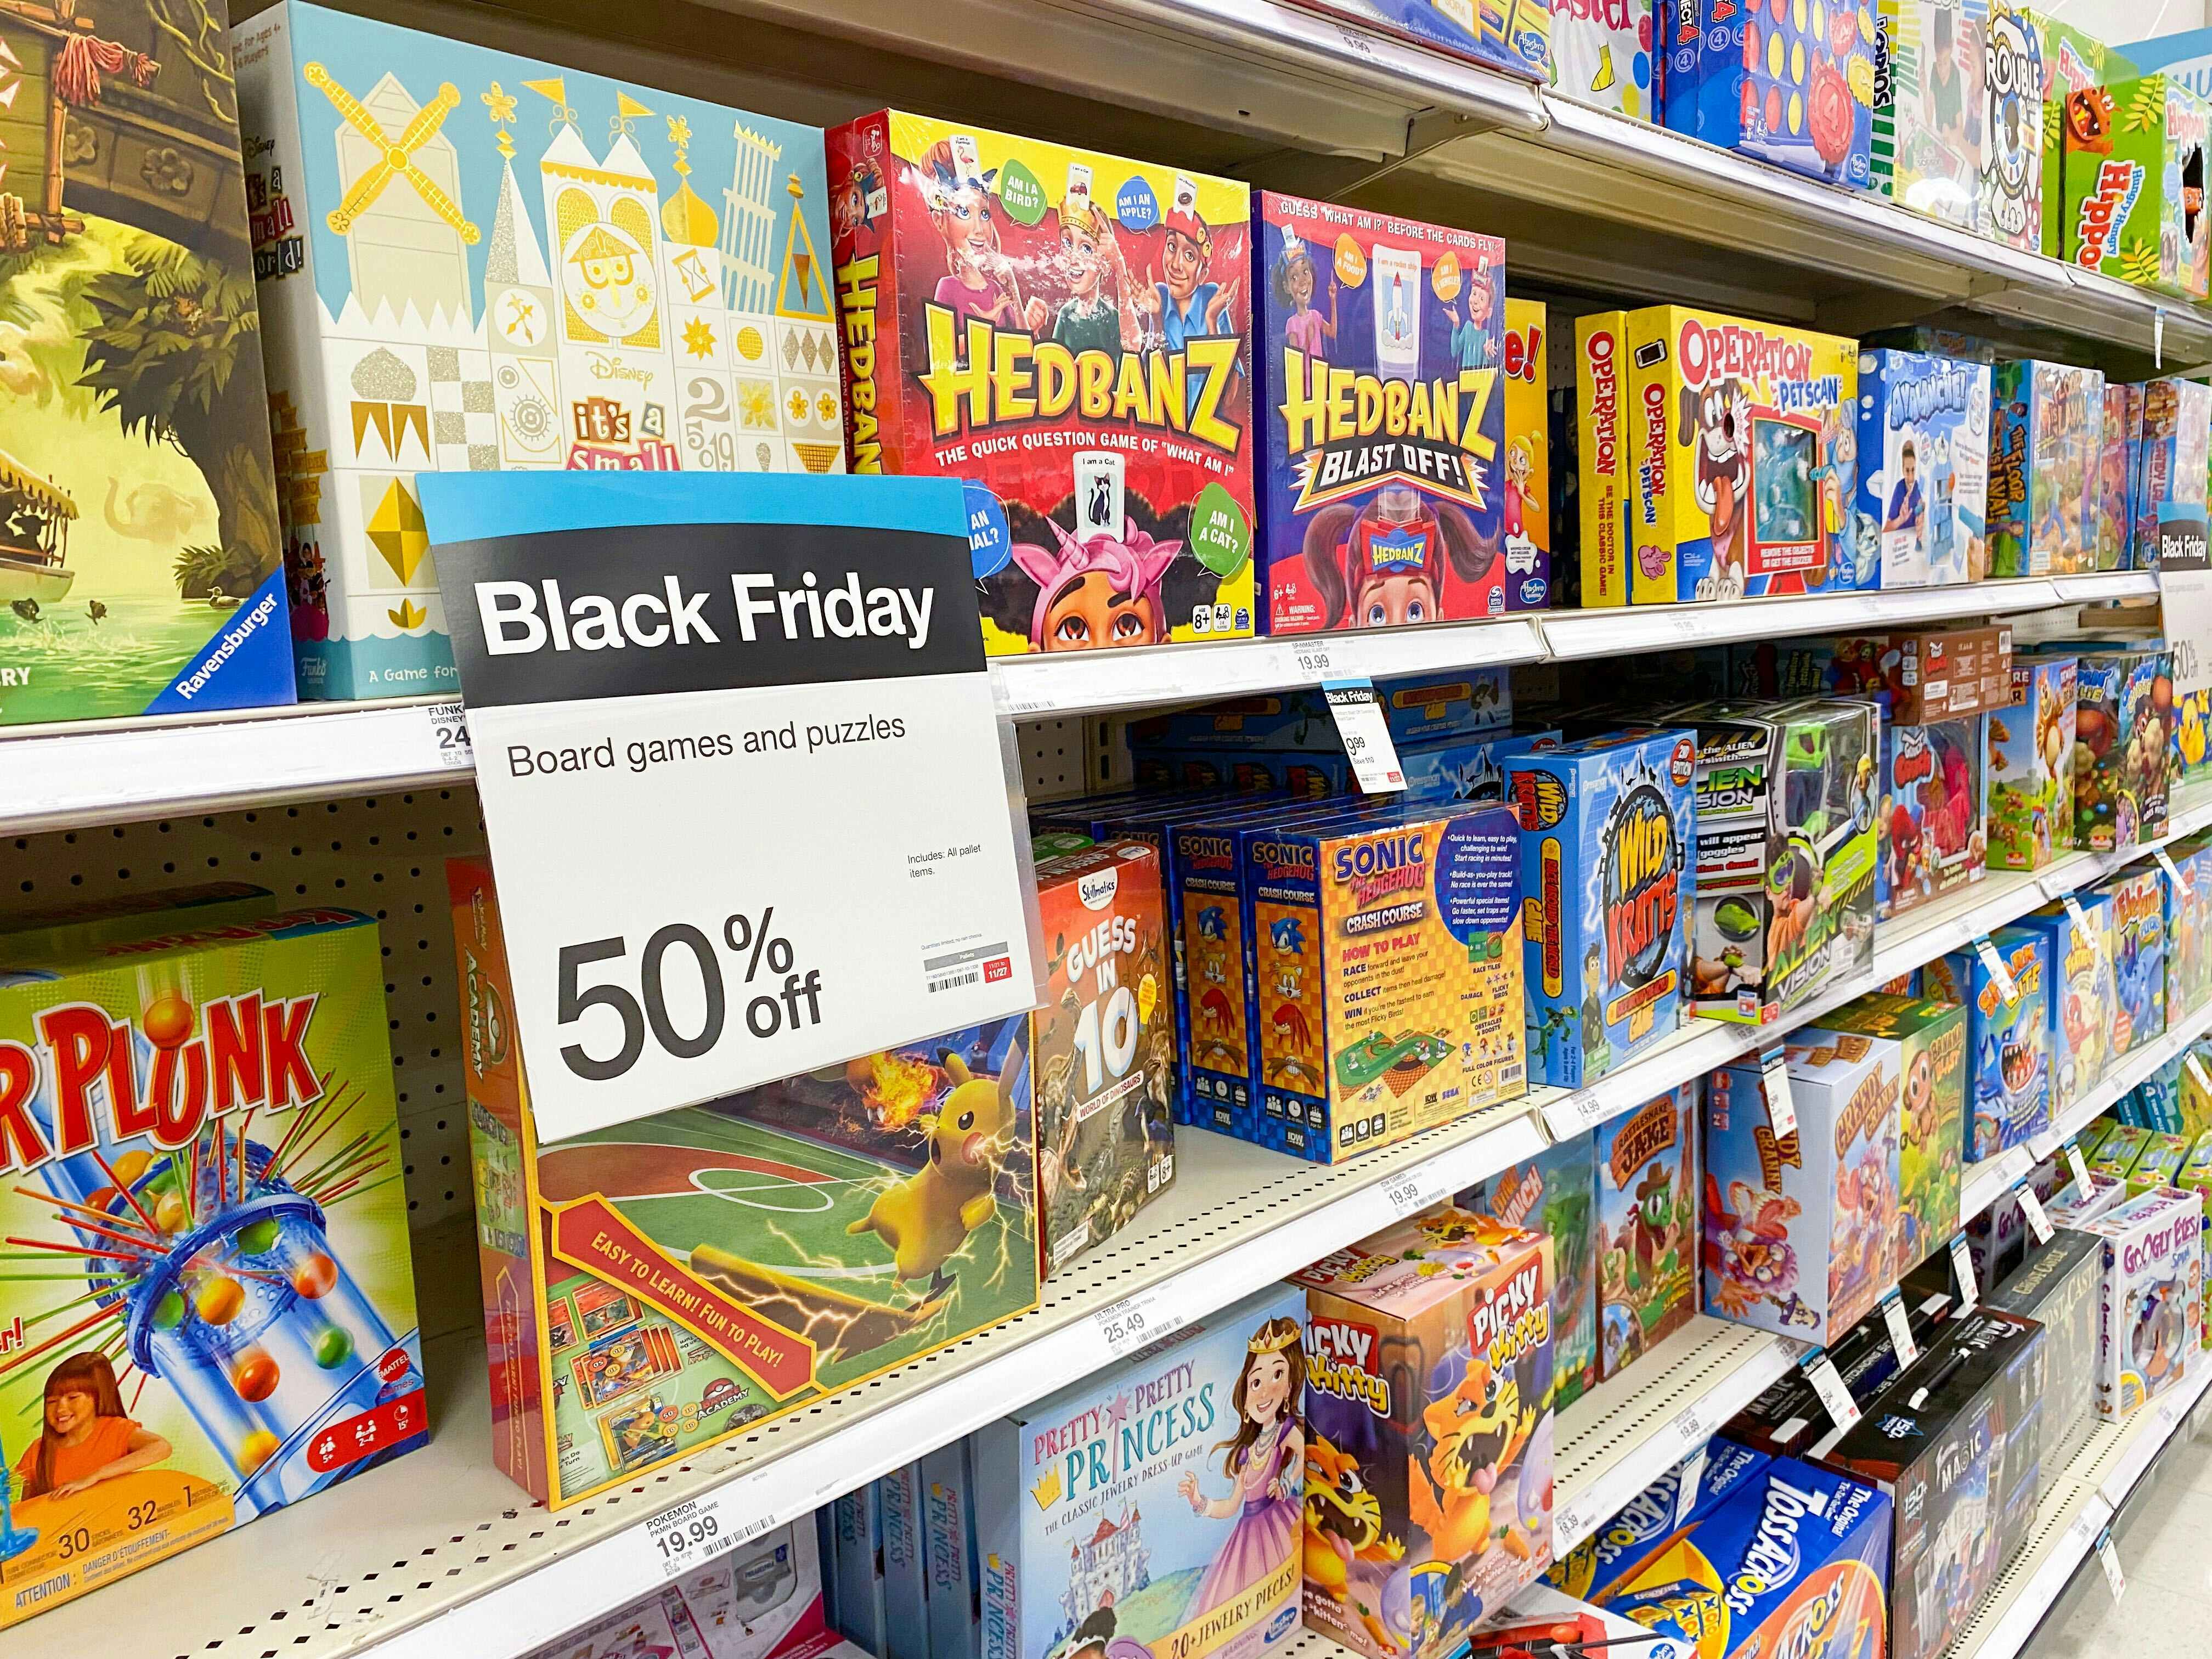 board games on sale for 50% off at Target